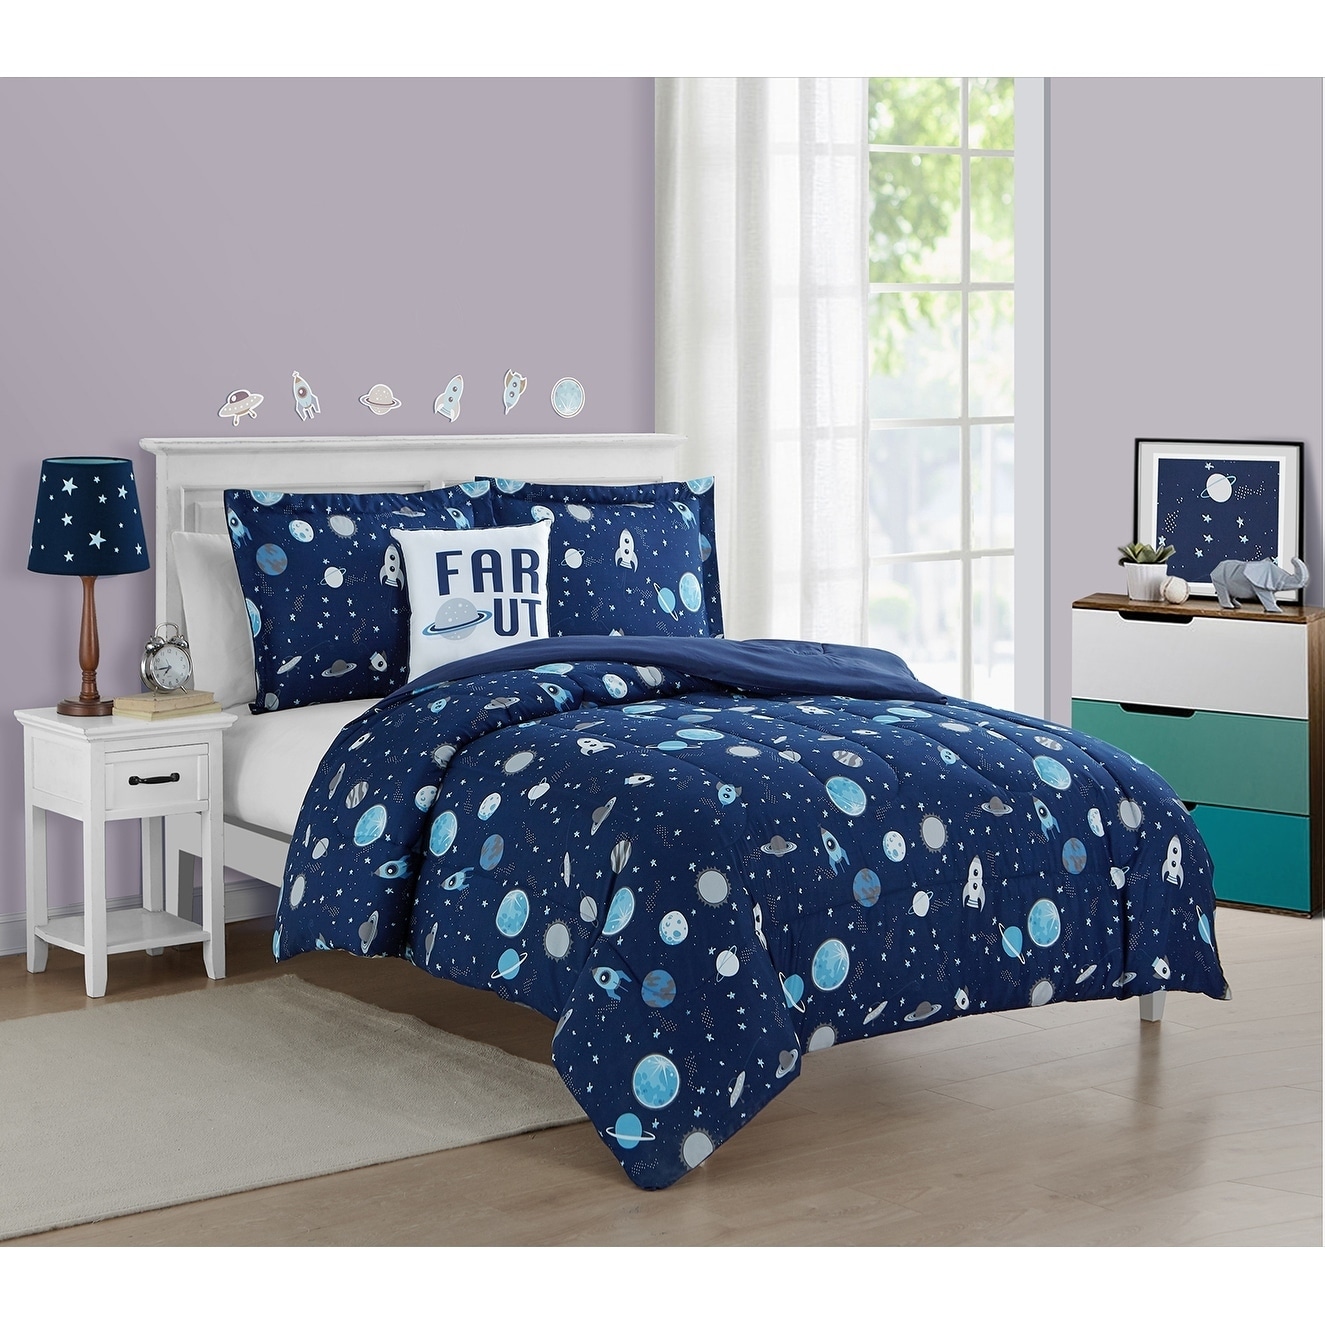 Space Boy Out Of This World 4pc Comforter Set C3804196 2d6a 4029 8440 76ae4ff9727e 